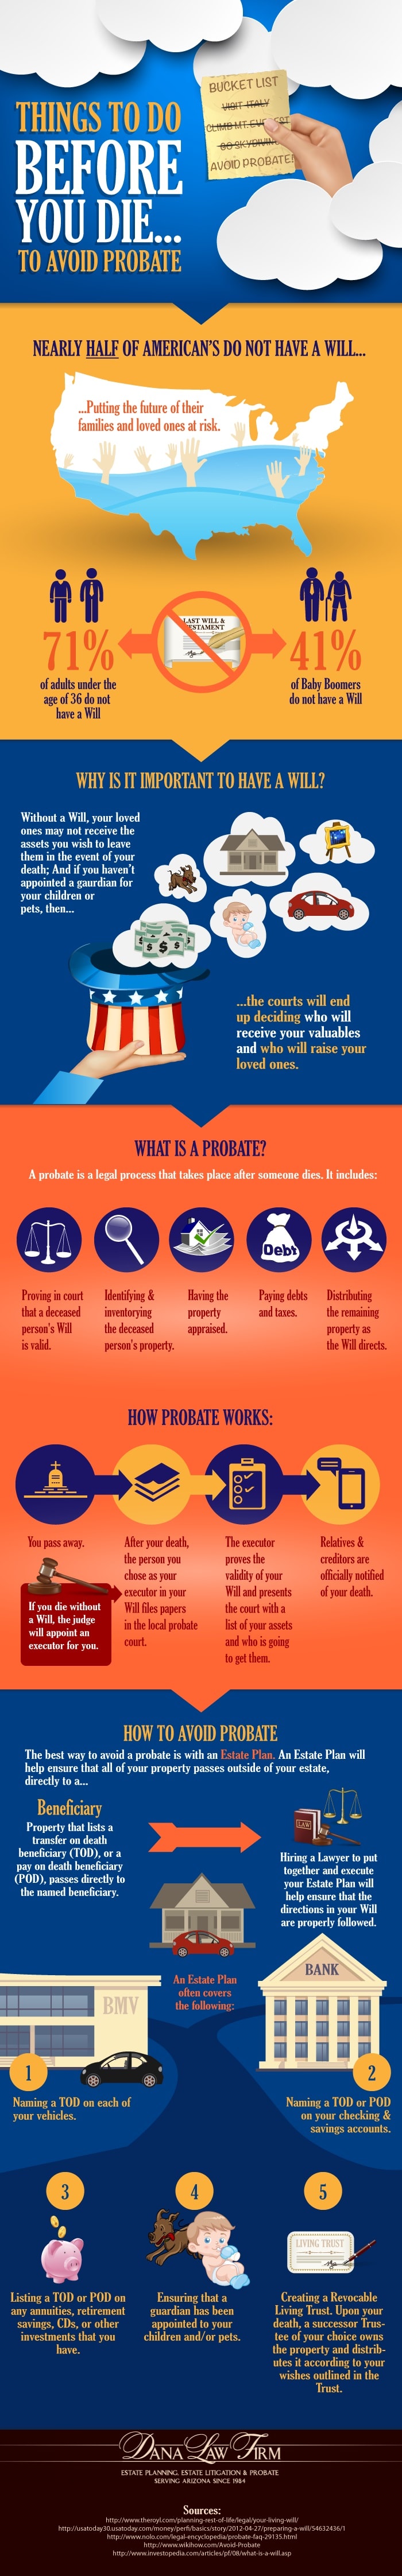 how to avoid probate